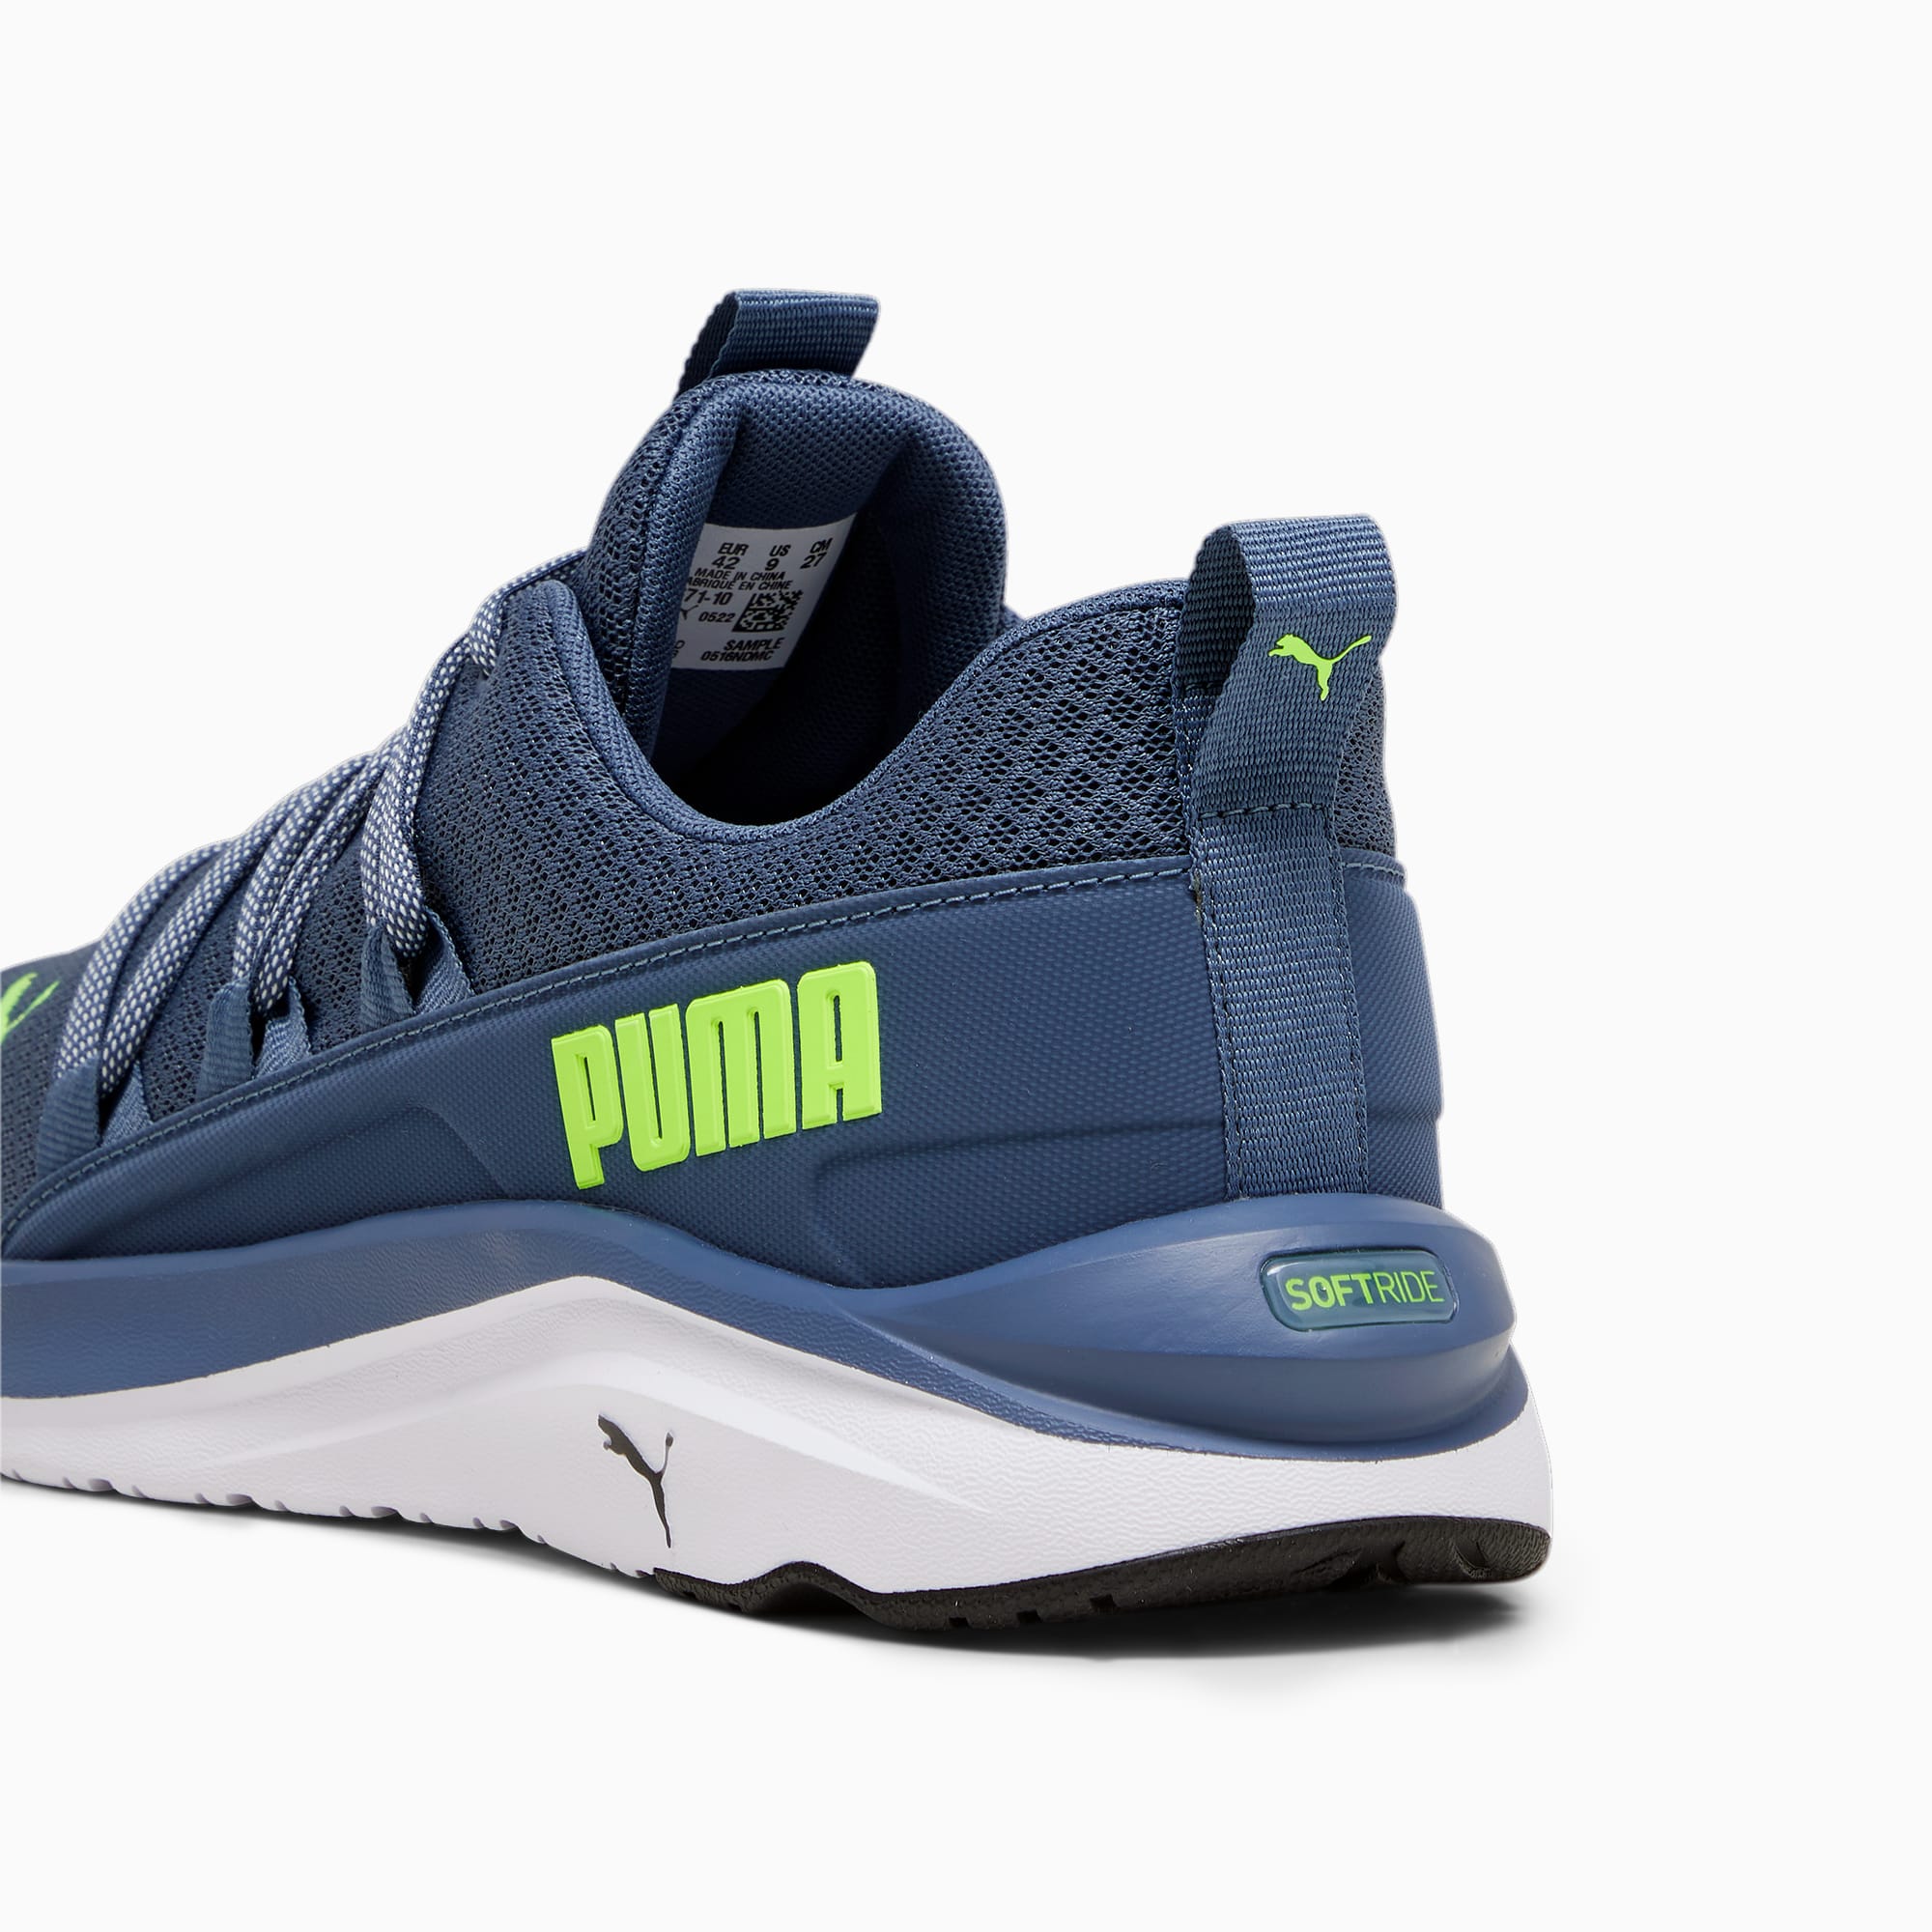 PUMA Softride One4All Running Shoes Men Sneakers, Inky Blue/Pro Green/Black, Size 39, Shoes